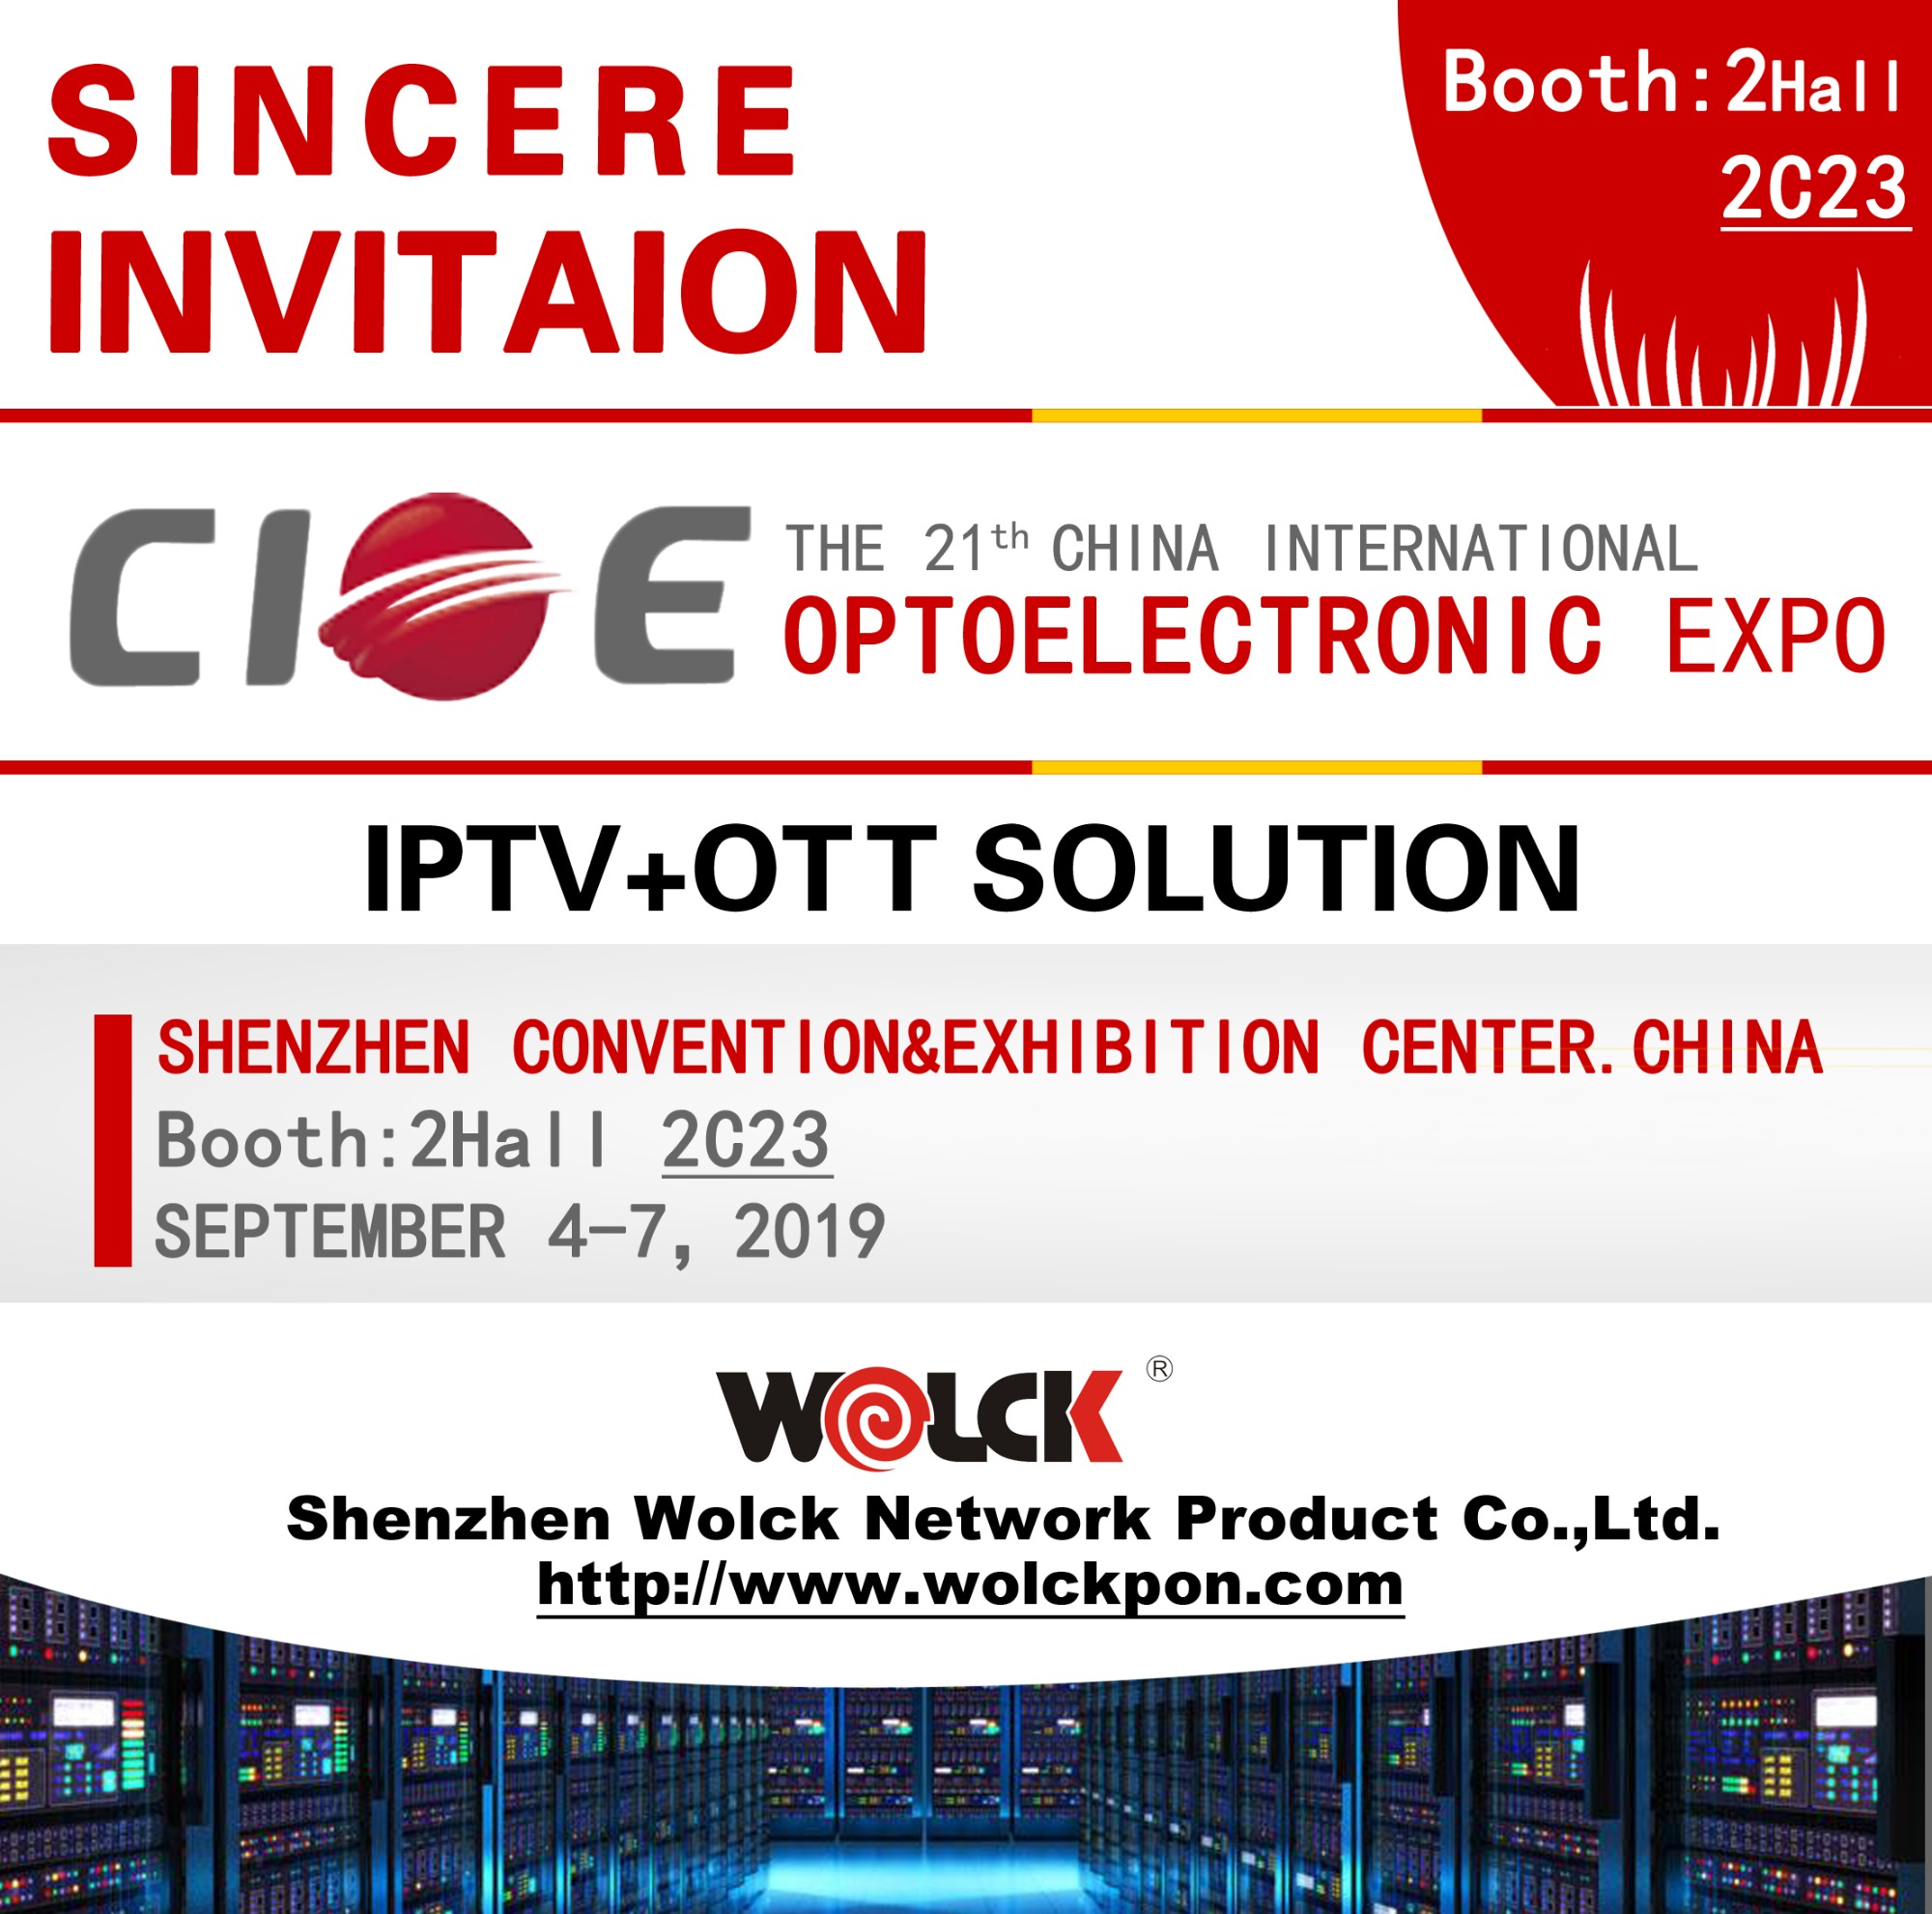 WOLCK invites you to participate in the &quot;21th China International Optoelectronic Exposition (CIOE2019)&quot;